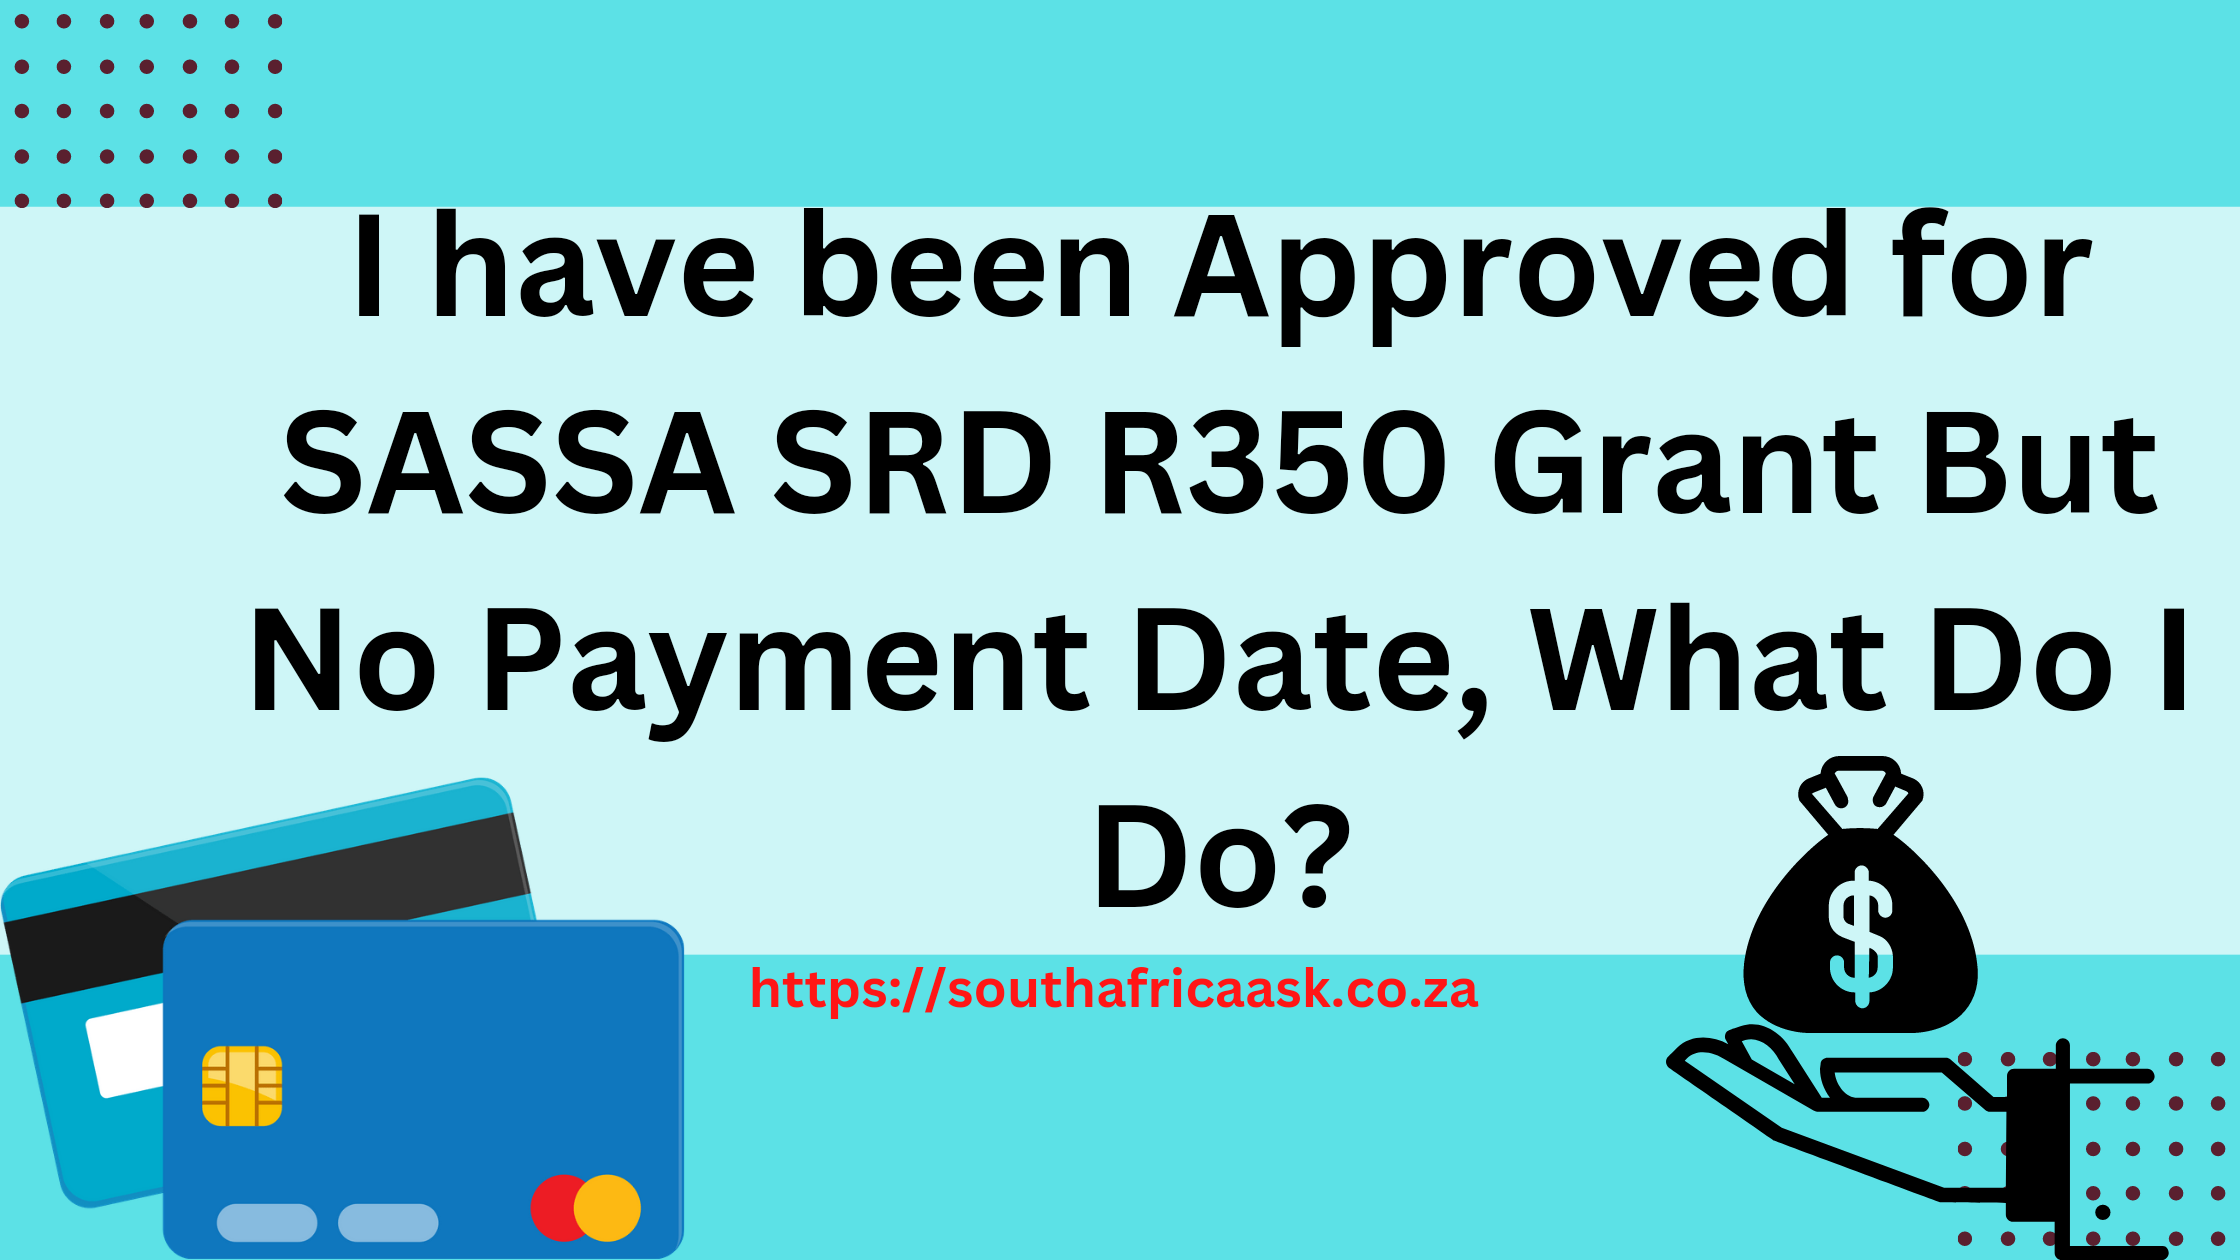 I have been Approved for SASSA SRD R350 Grant But No Payment Date, What Do I Do?